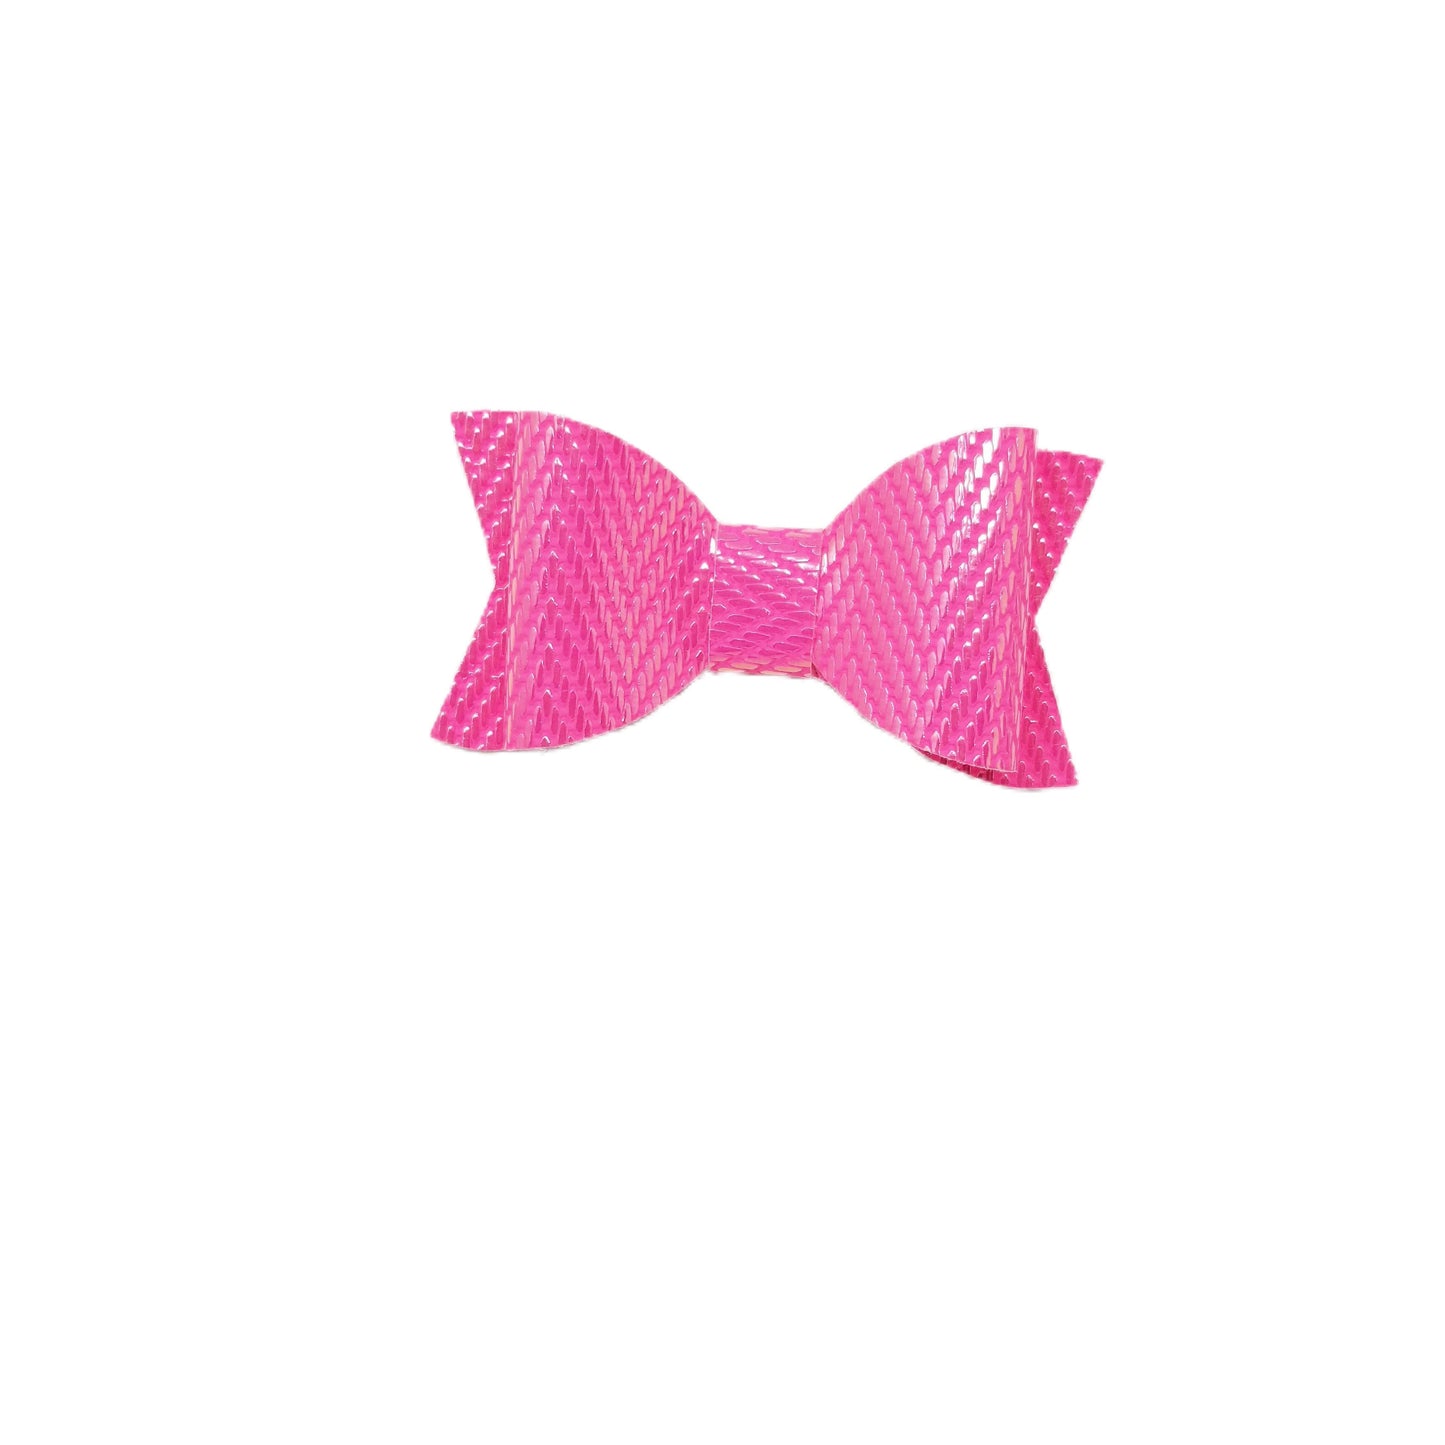 4 inch Hot Pink Metallic Chevron Claire Bow